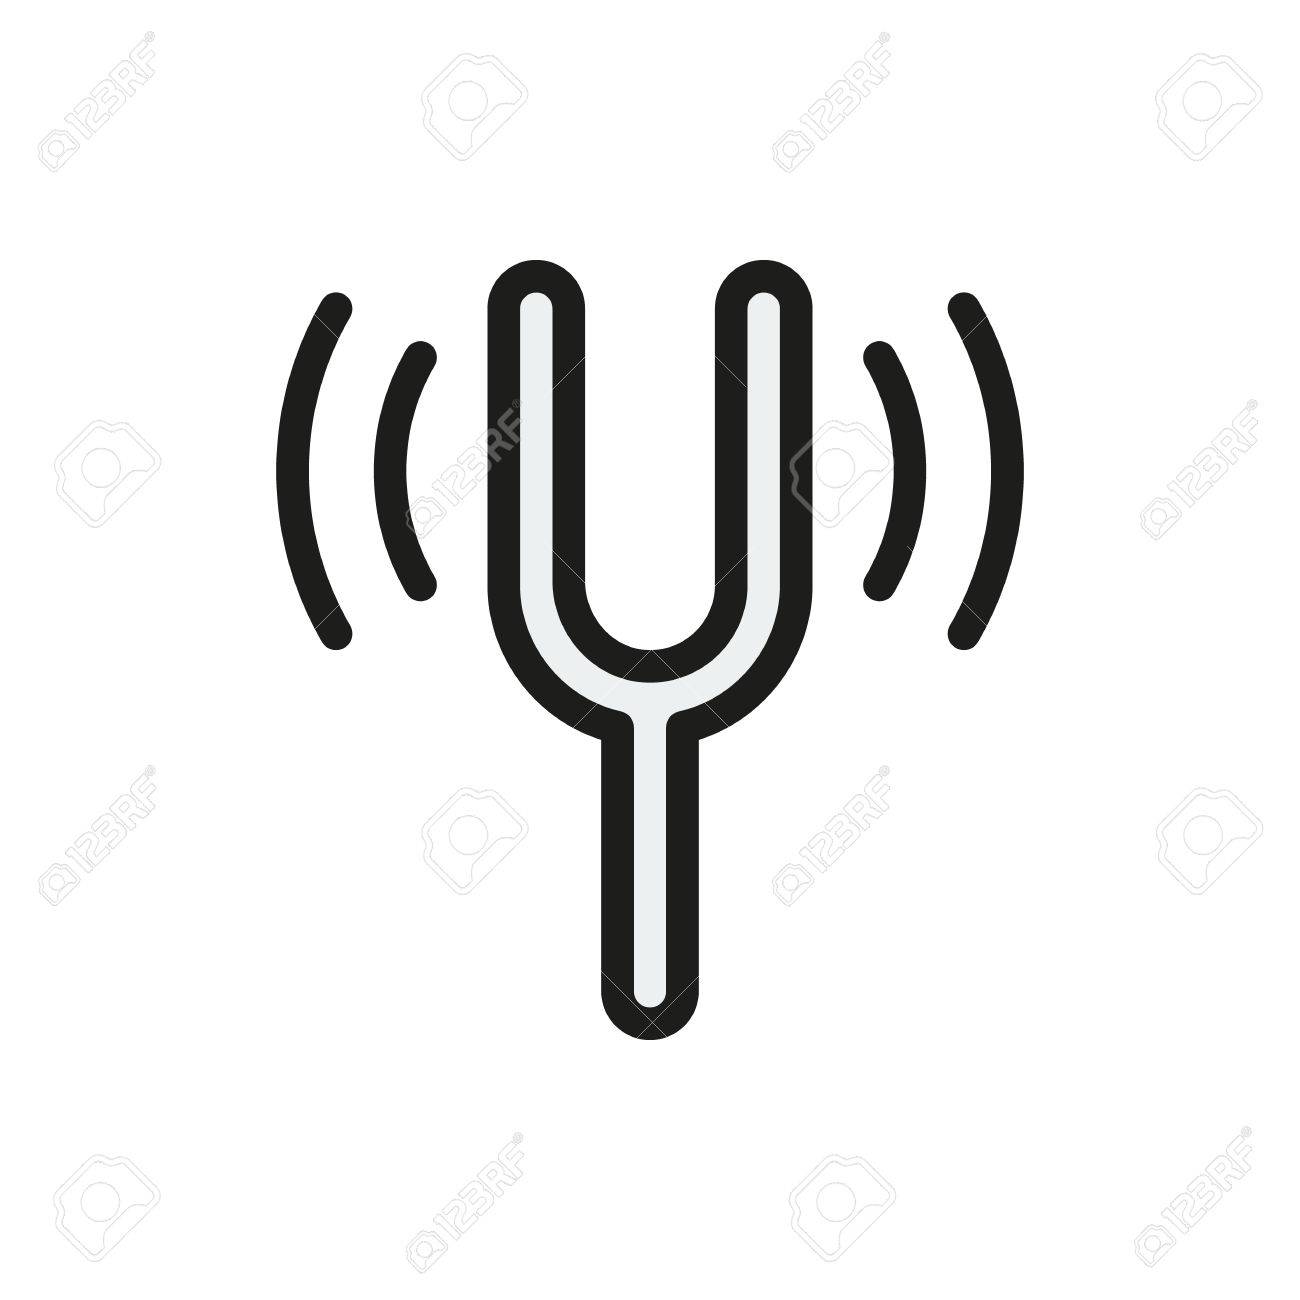 Tuning fork vector illustration - Search Clipart, Drawings, and 